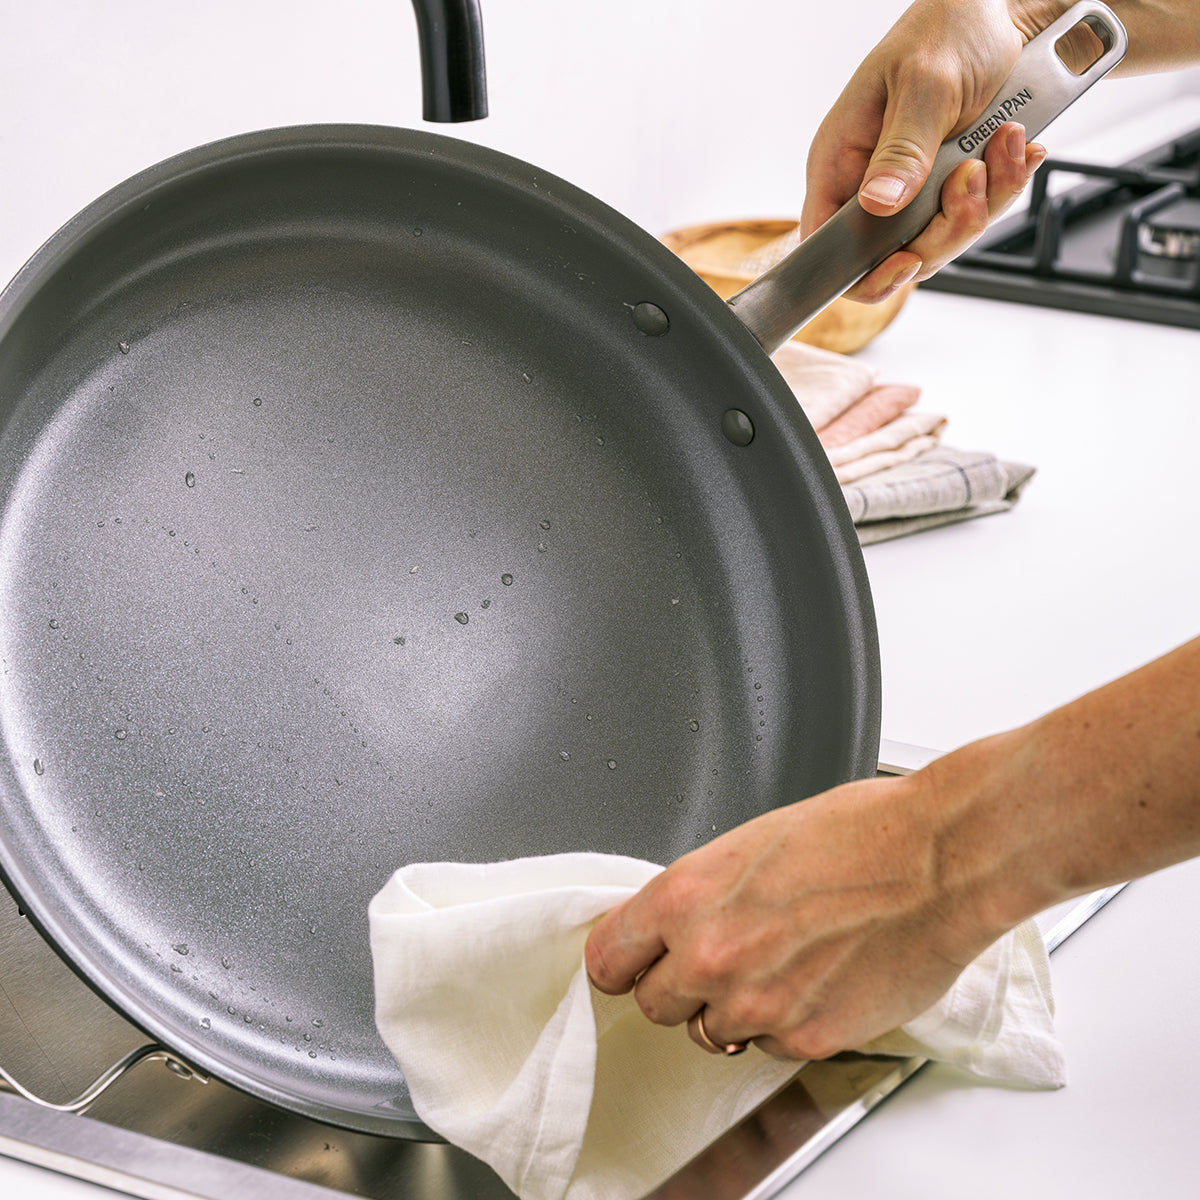 How to use and wash ceramic frying pans?